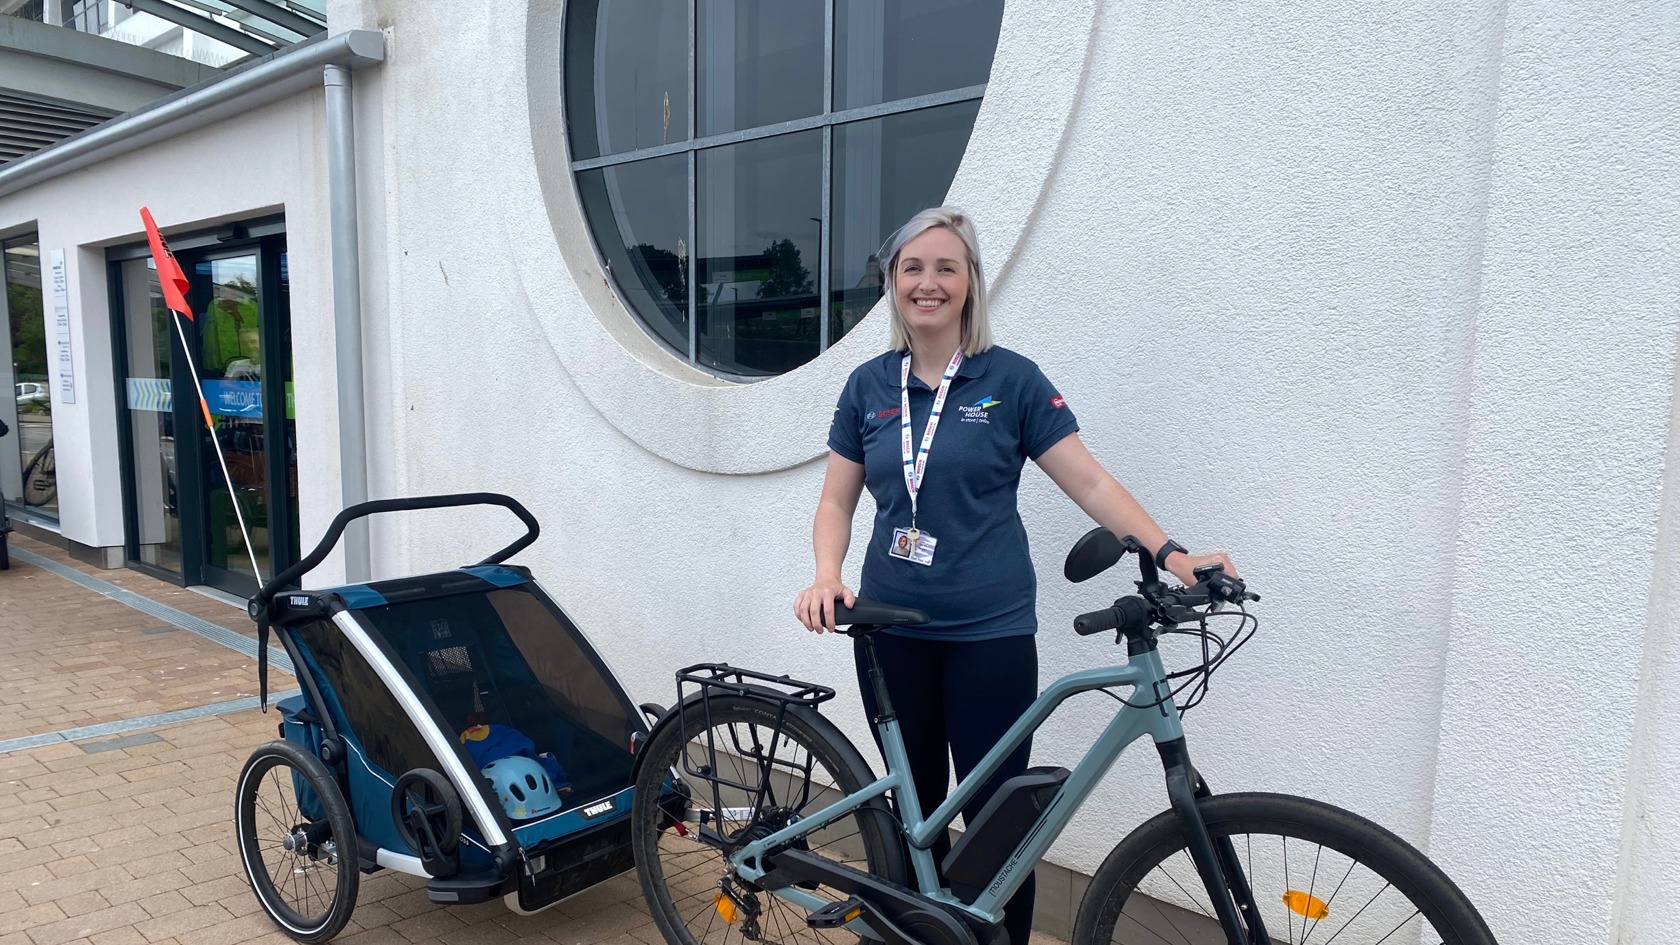 Sarah Naylor, Category Manager at the Powerhouse standing in a blue Powerhouse t-shirt next to her electric bike with Thule Chariot Cross trailer